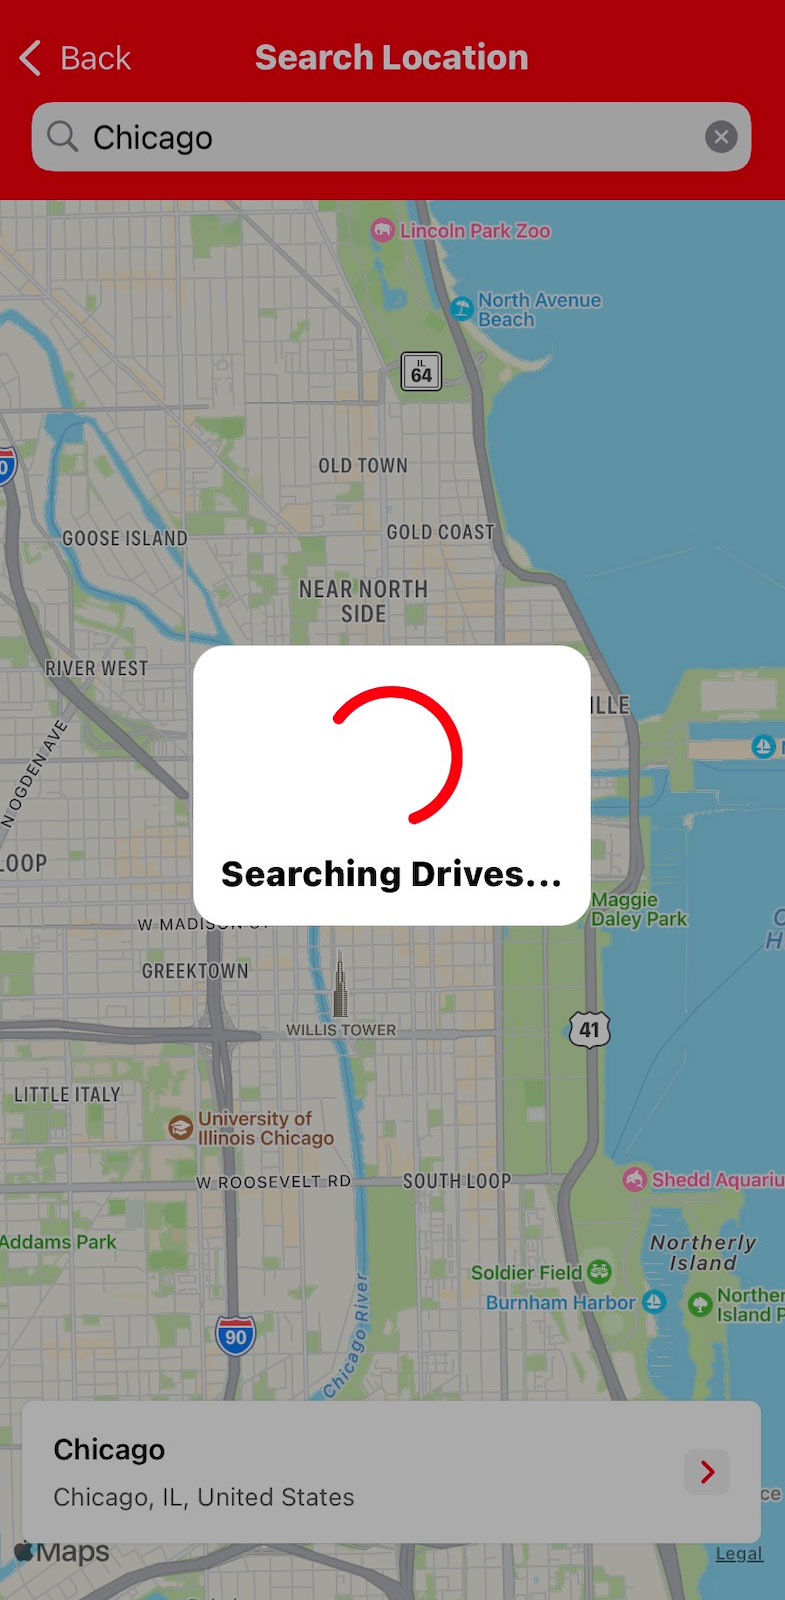 A screenshot from the American Red Cross Blood Donor App for a Blood Drive search in Chicago, IL. There is a loading indicator that says: "Searching Drives..." Behind the loading indicator is a dimmed map of Chicago.